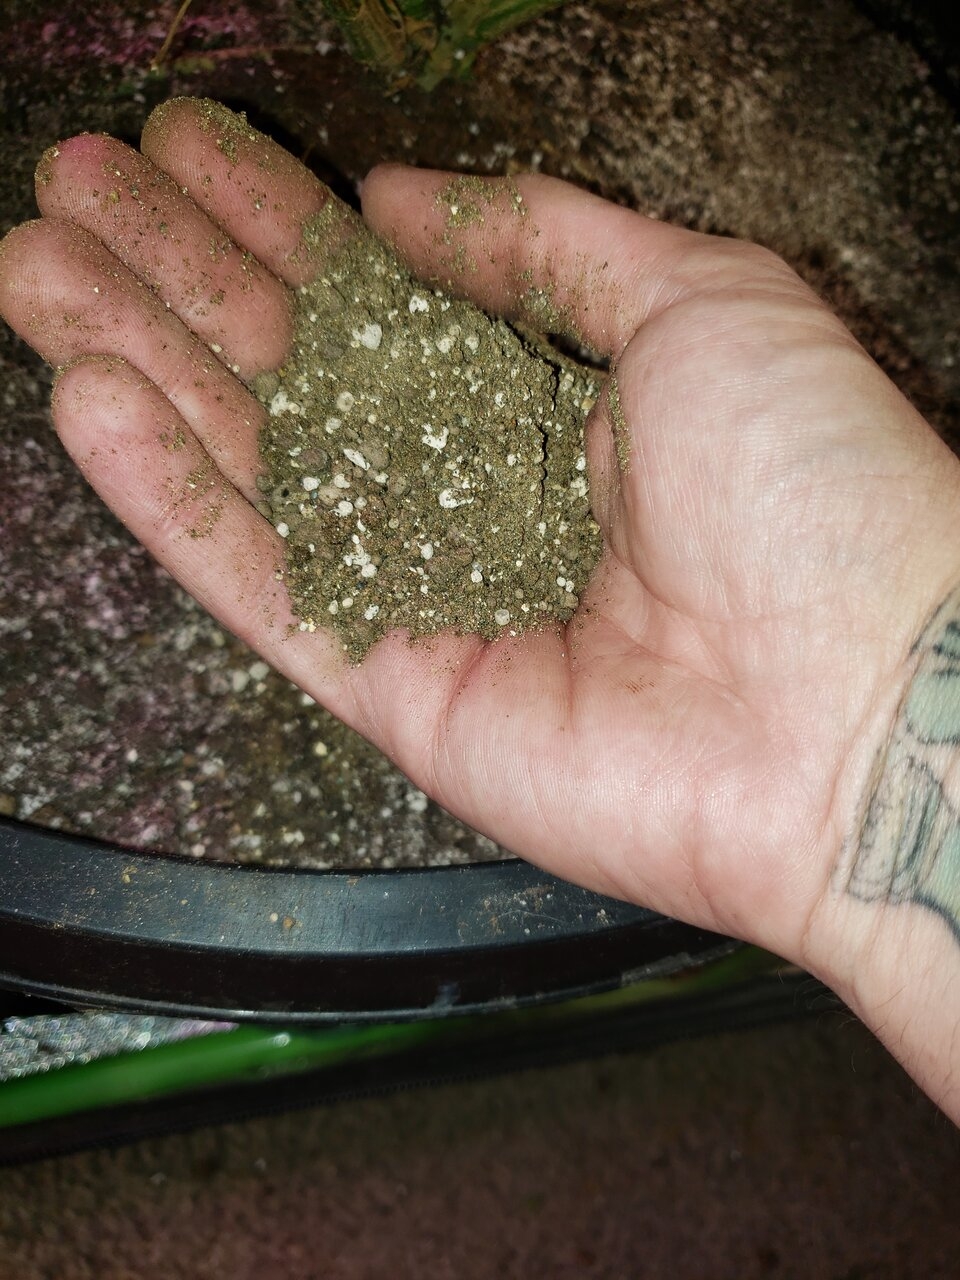 This is about how much i used a small handfull per plant